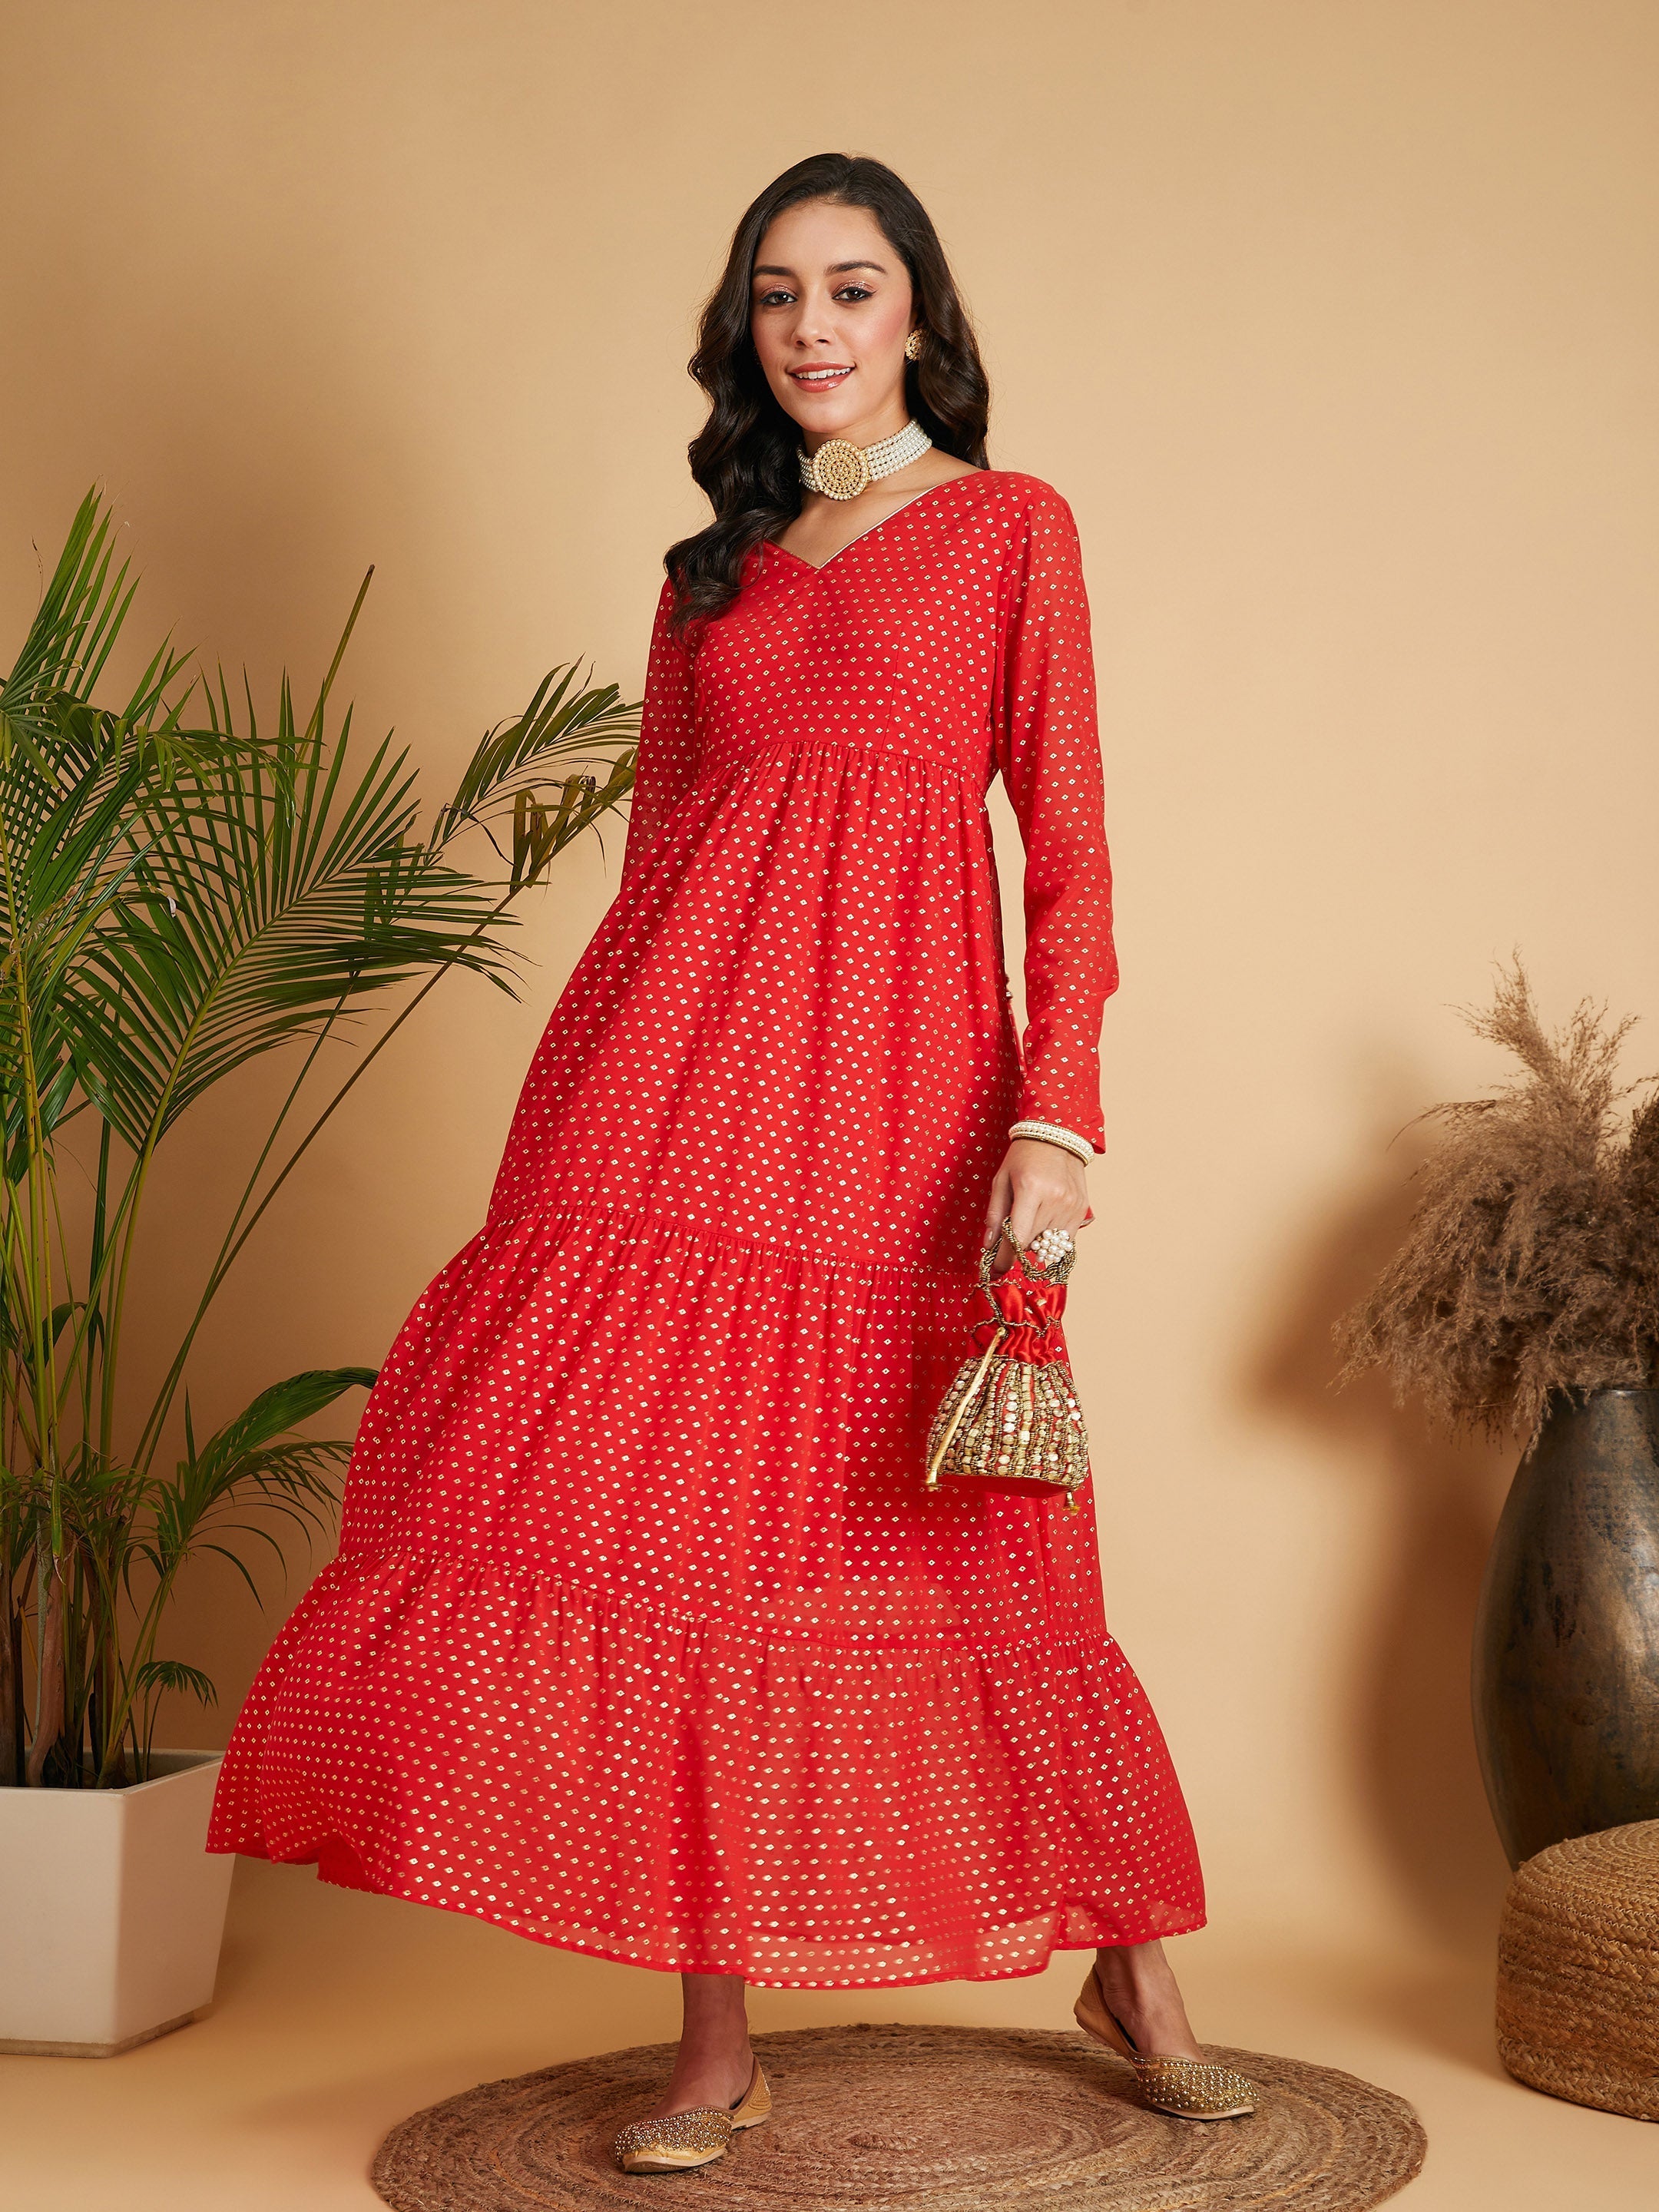 Buy Red Tiered Maxi Dress for Women Online